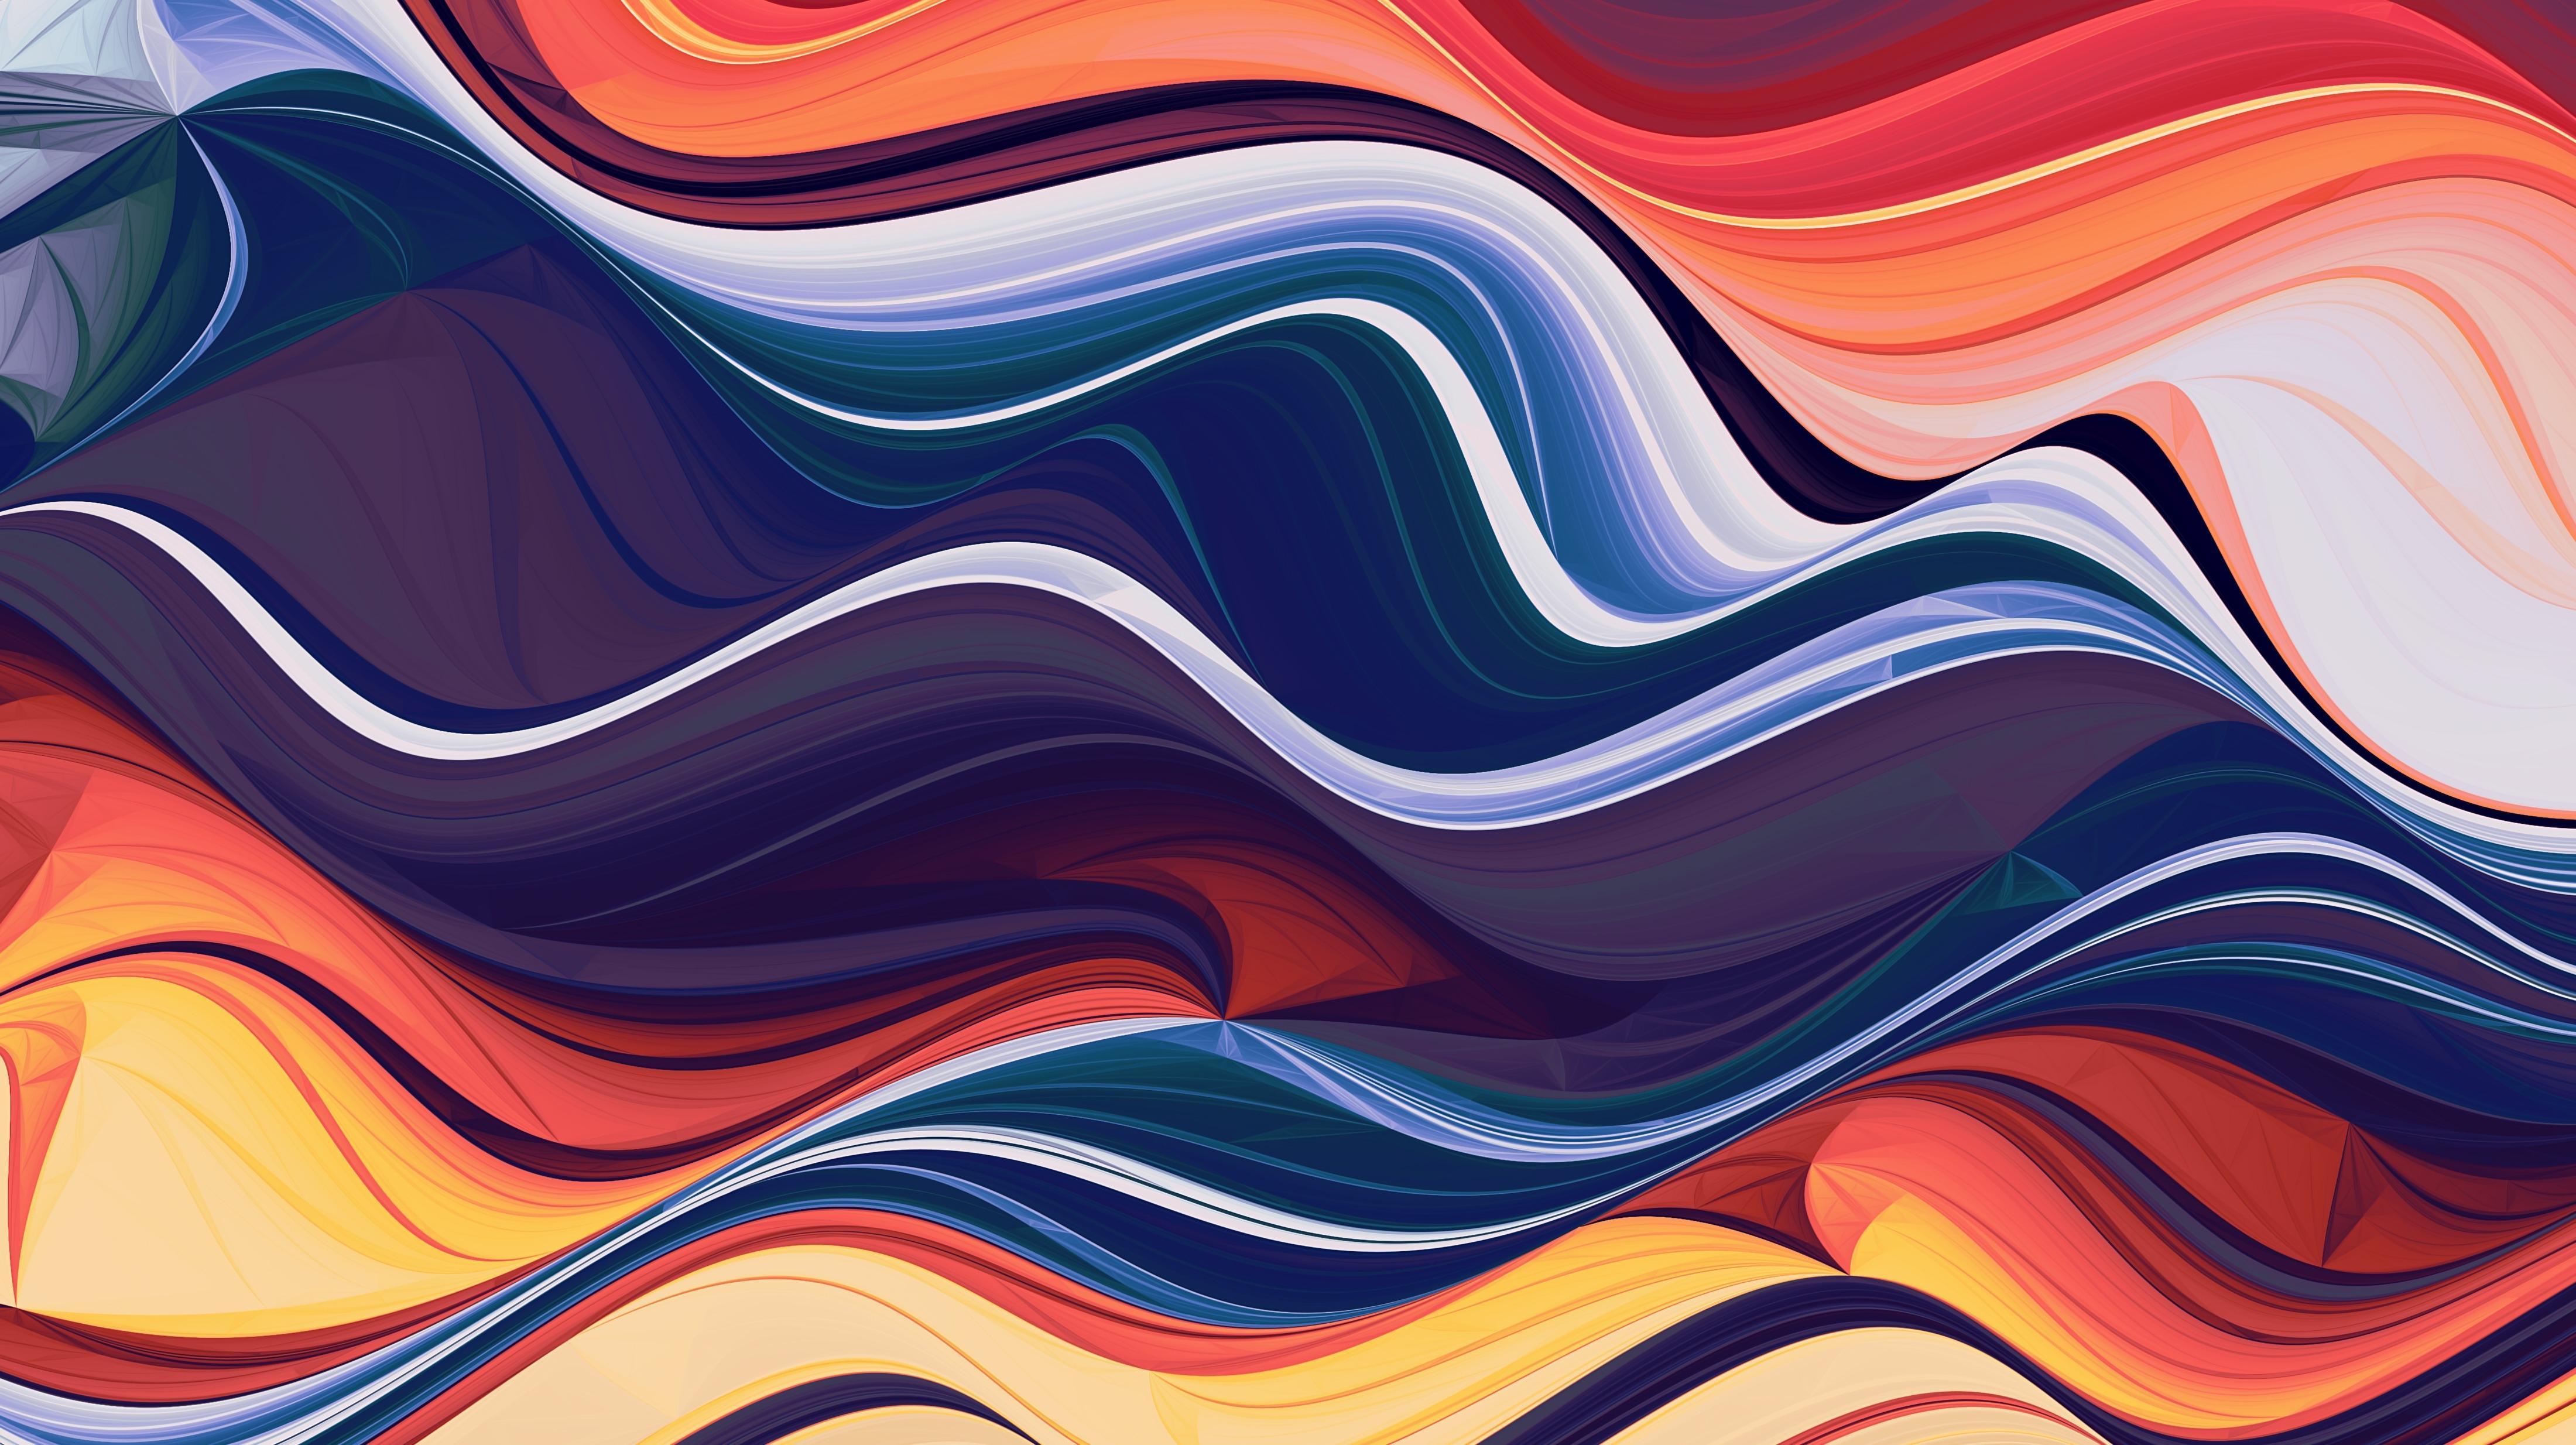 Details 100 abstract wave background - Abzlocal.mx